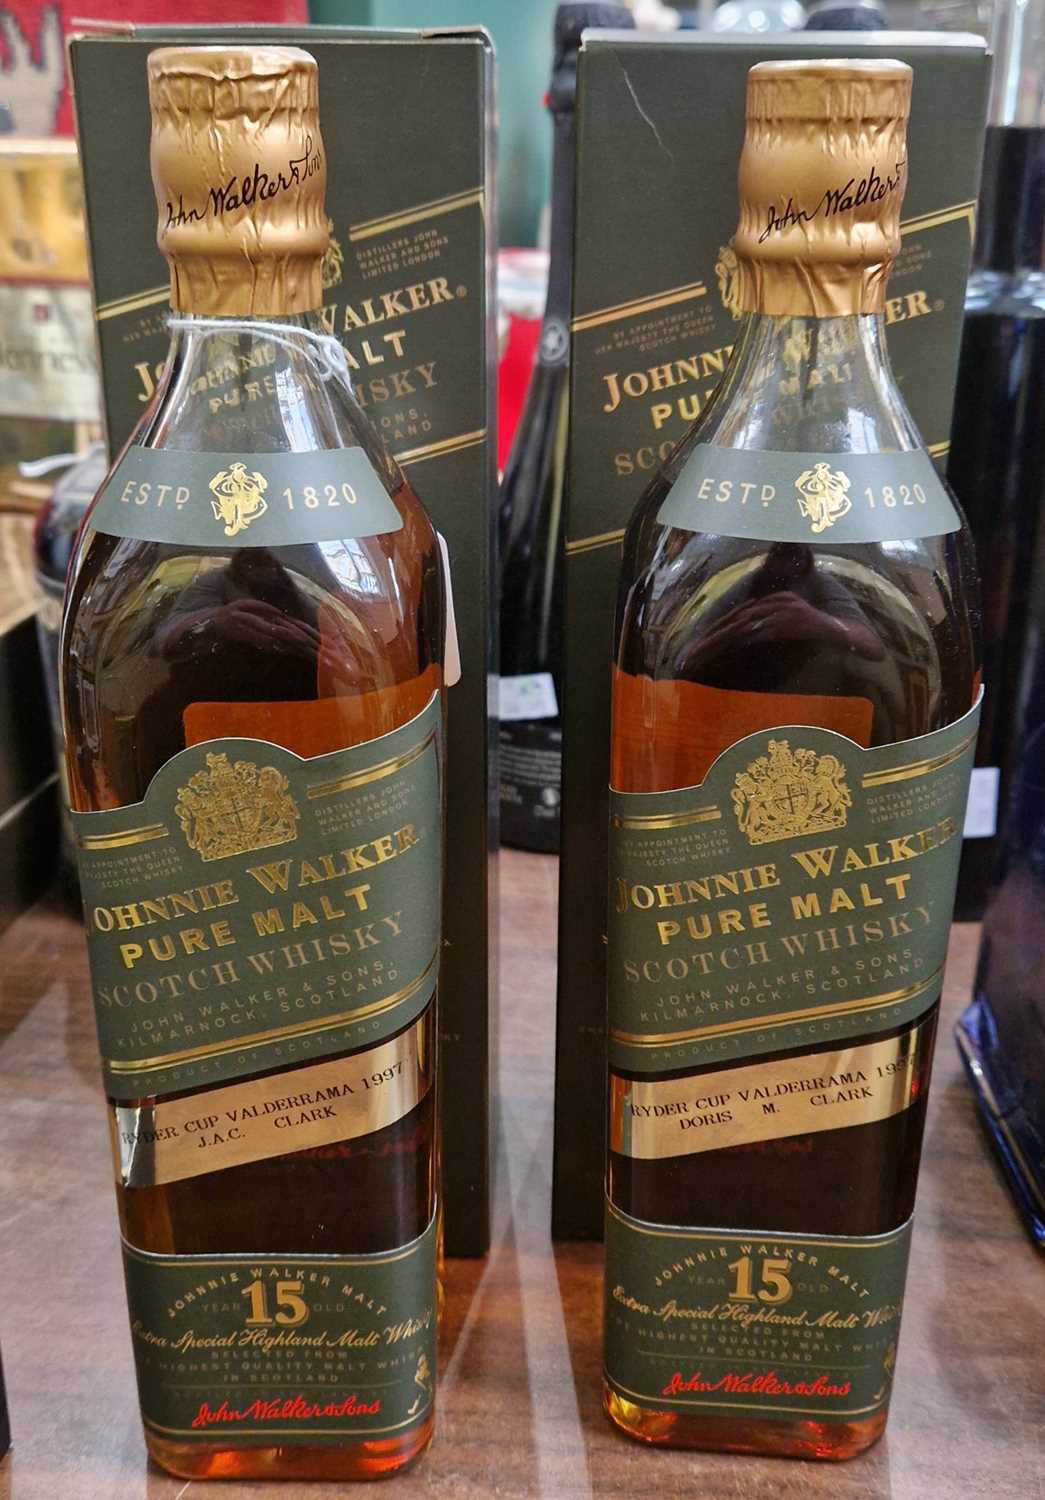 Two bottles of Johnnie Walker Green label Pure Malt scotch whisky 15 year old, each with